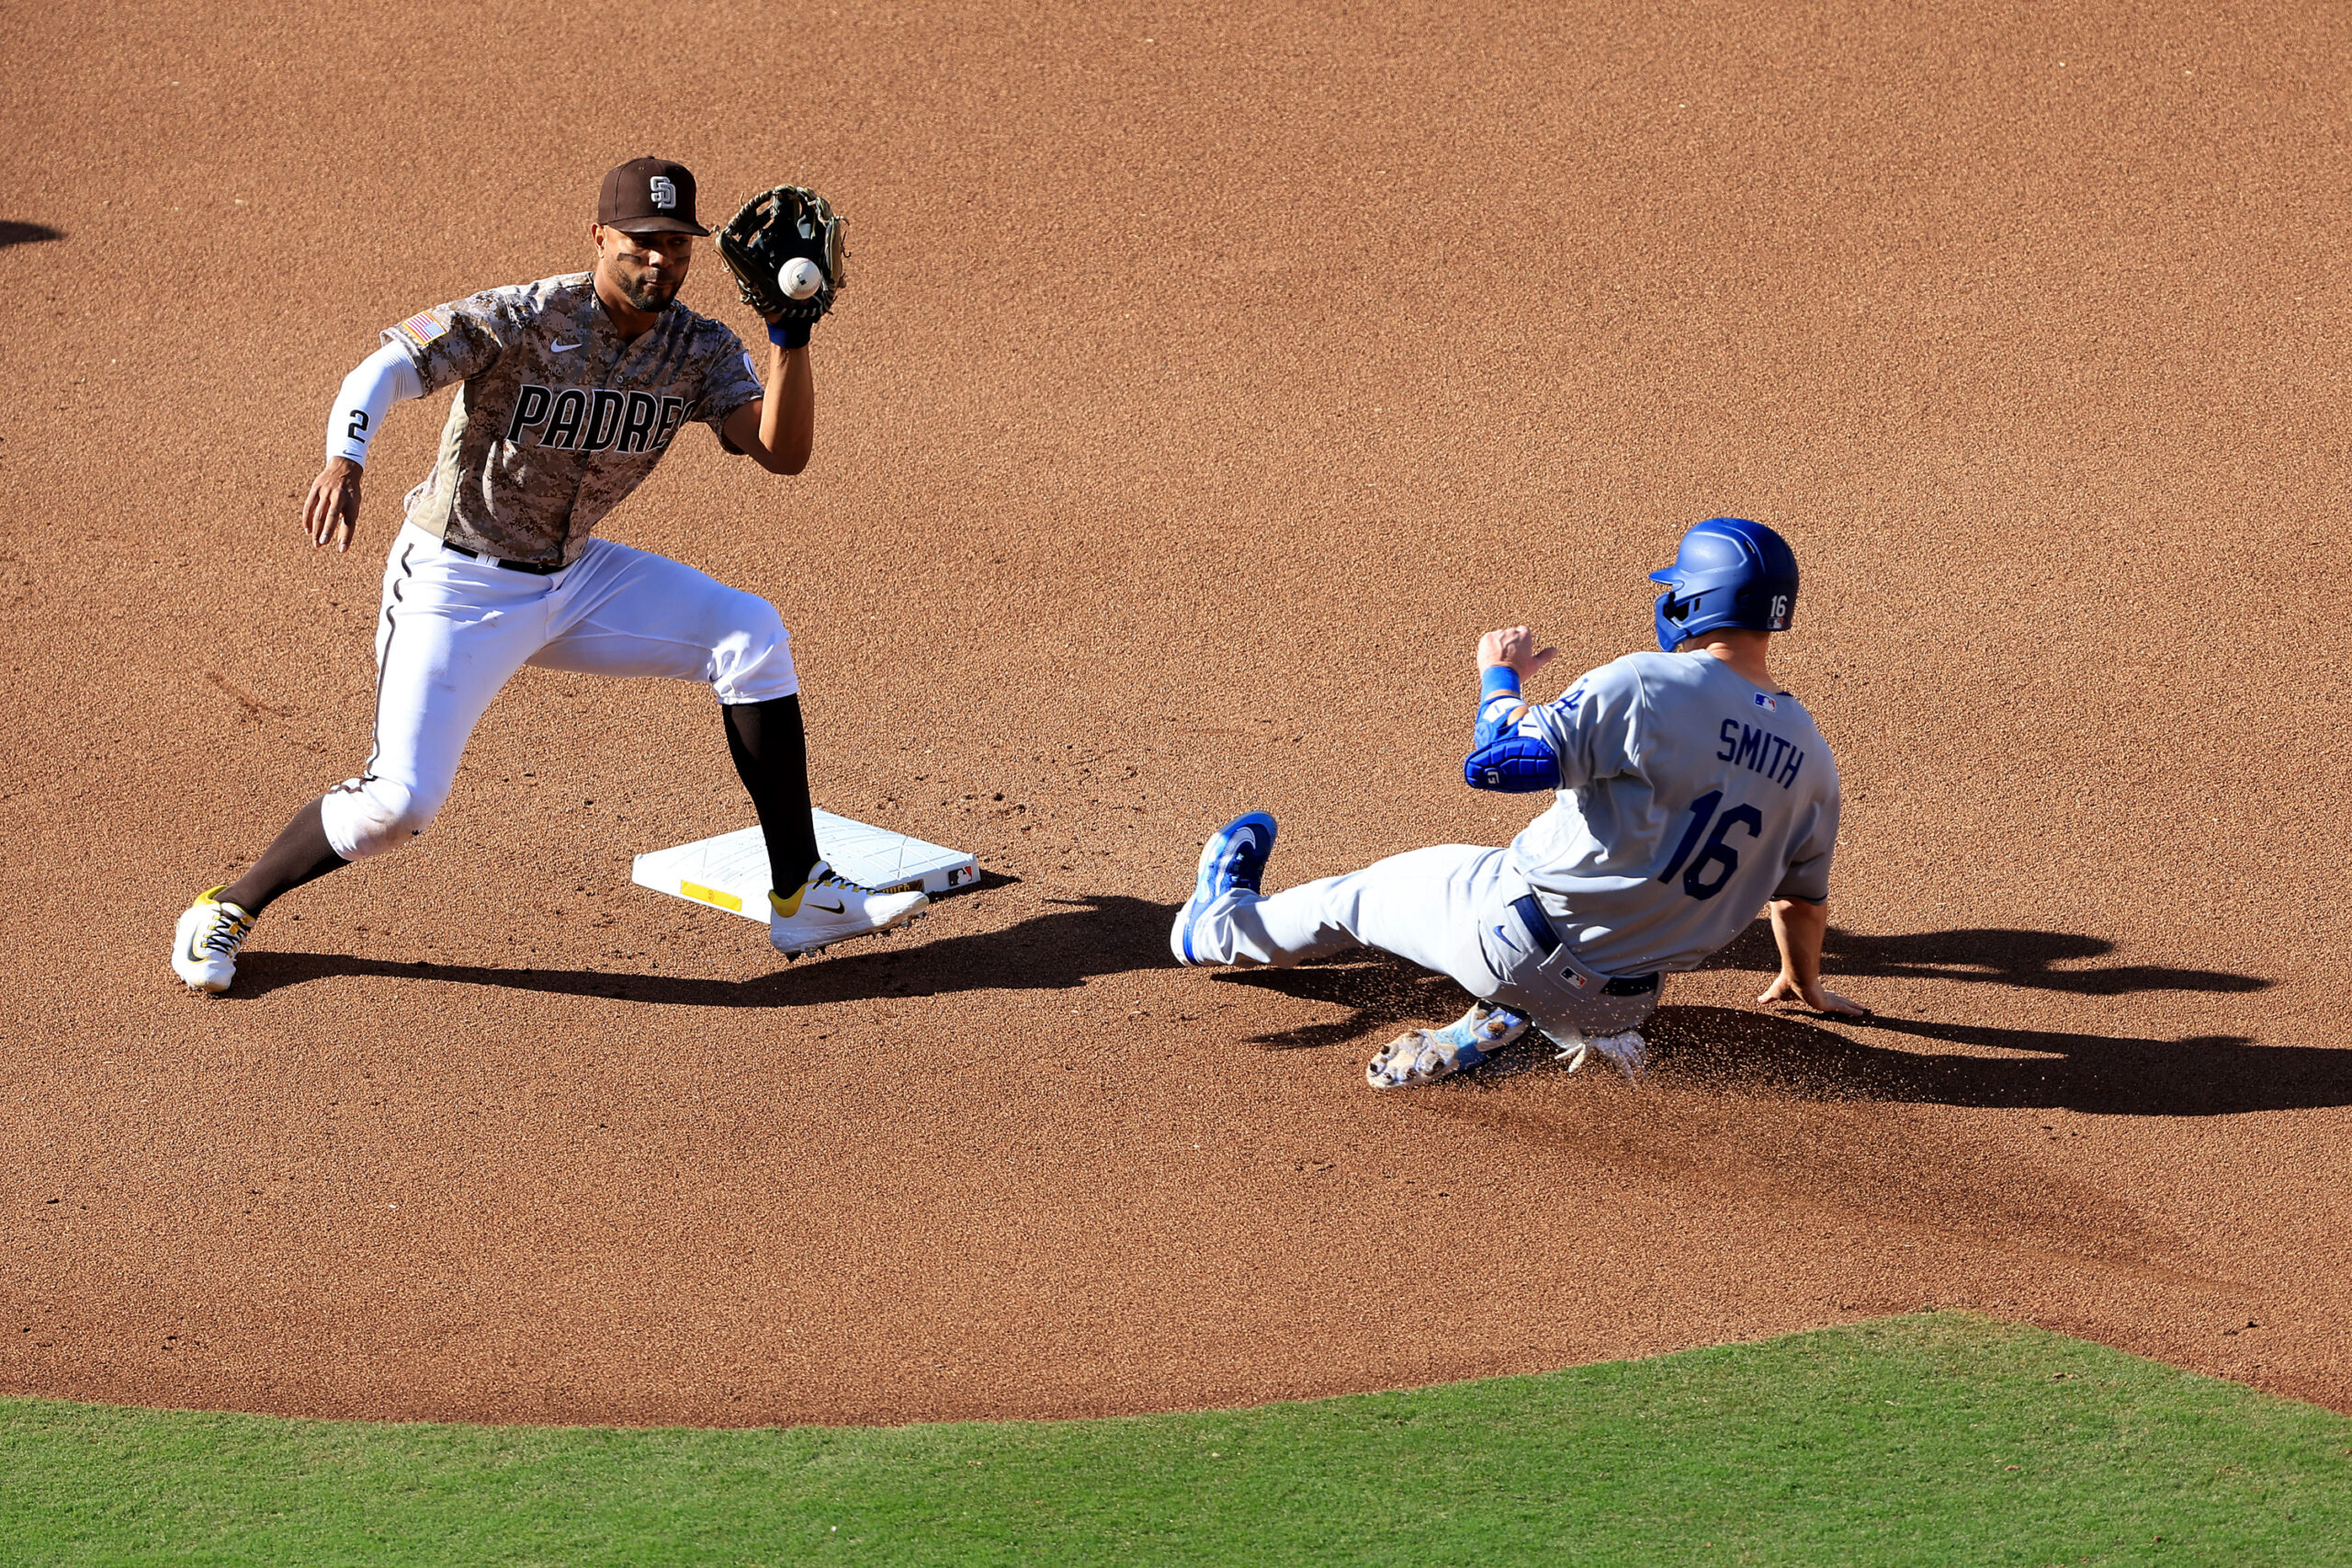 Has Dodgers-Giants Rivalry Been Upstaged by Dodgers-Padres?